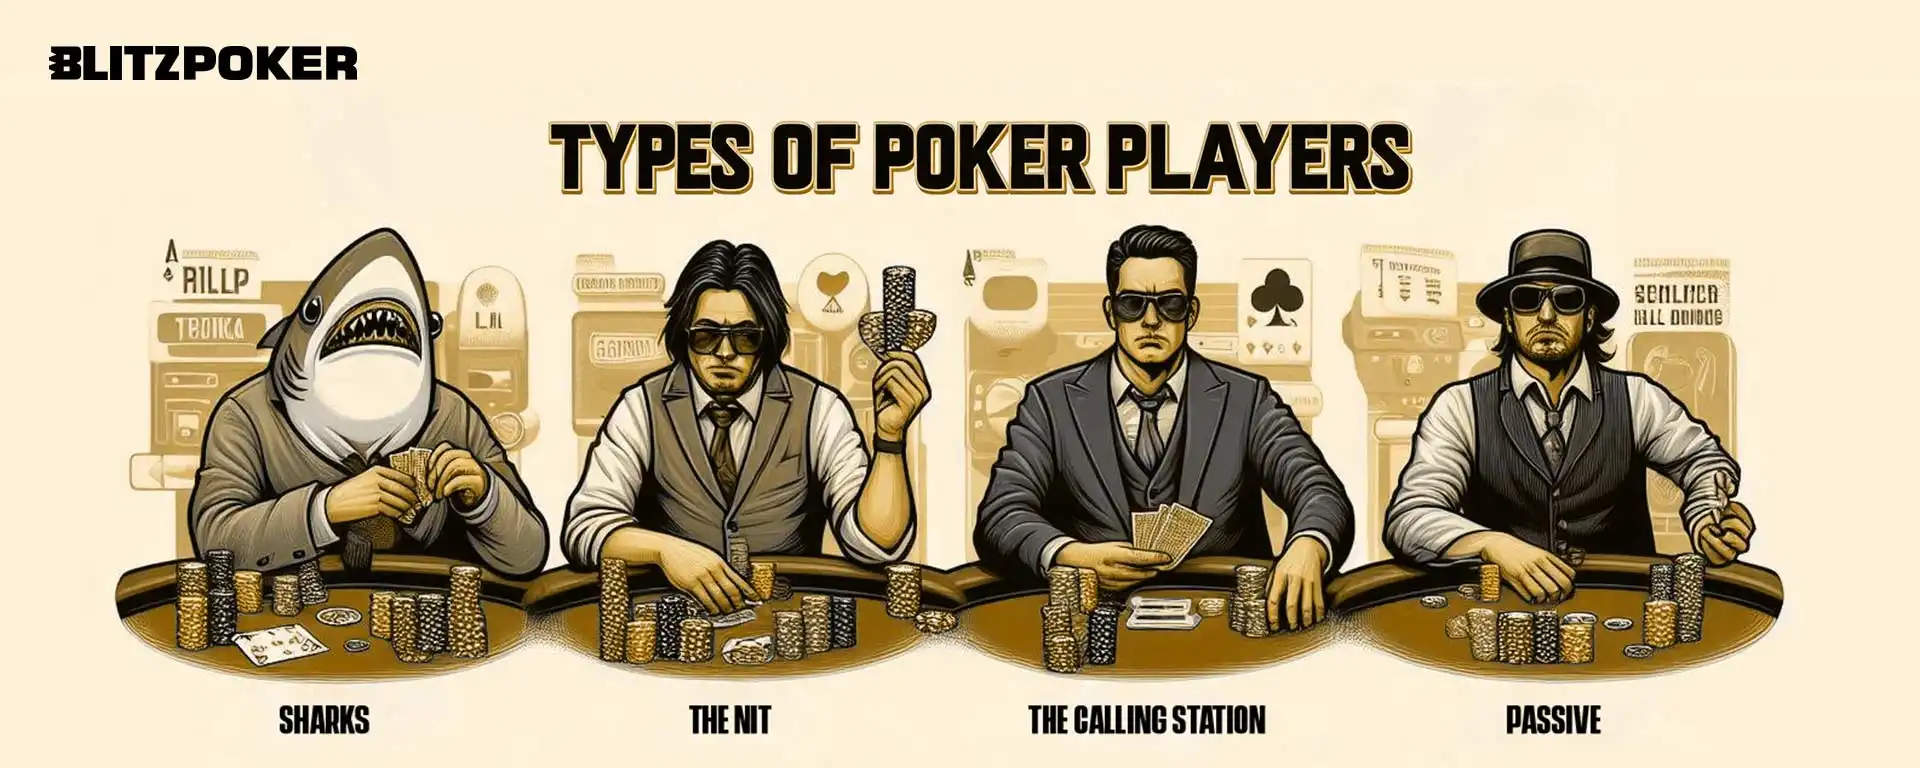 Types of Poker Players: 10 Different Poker Personalities